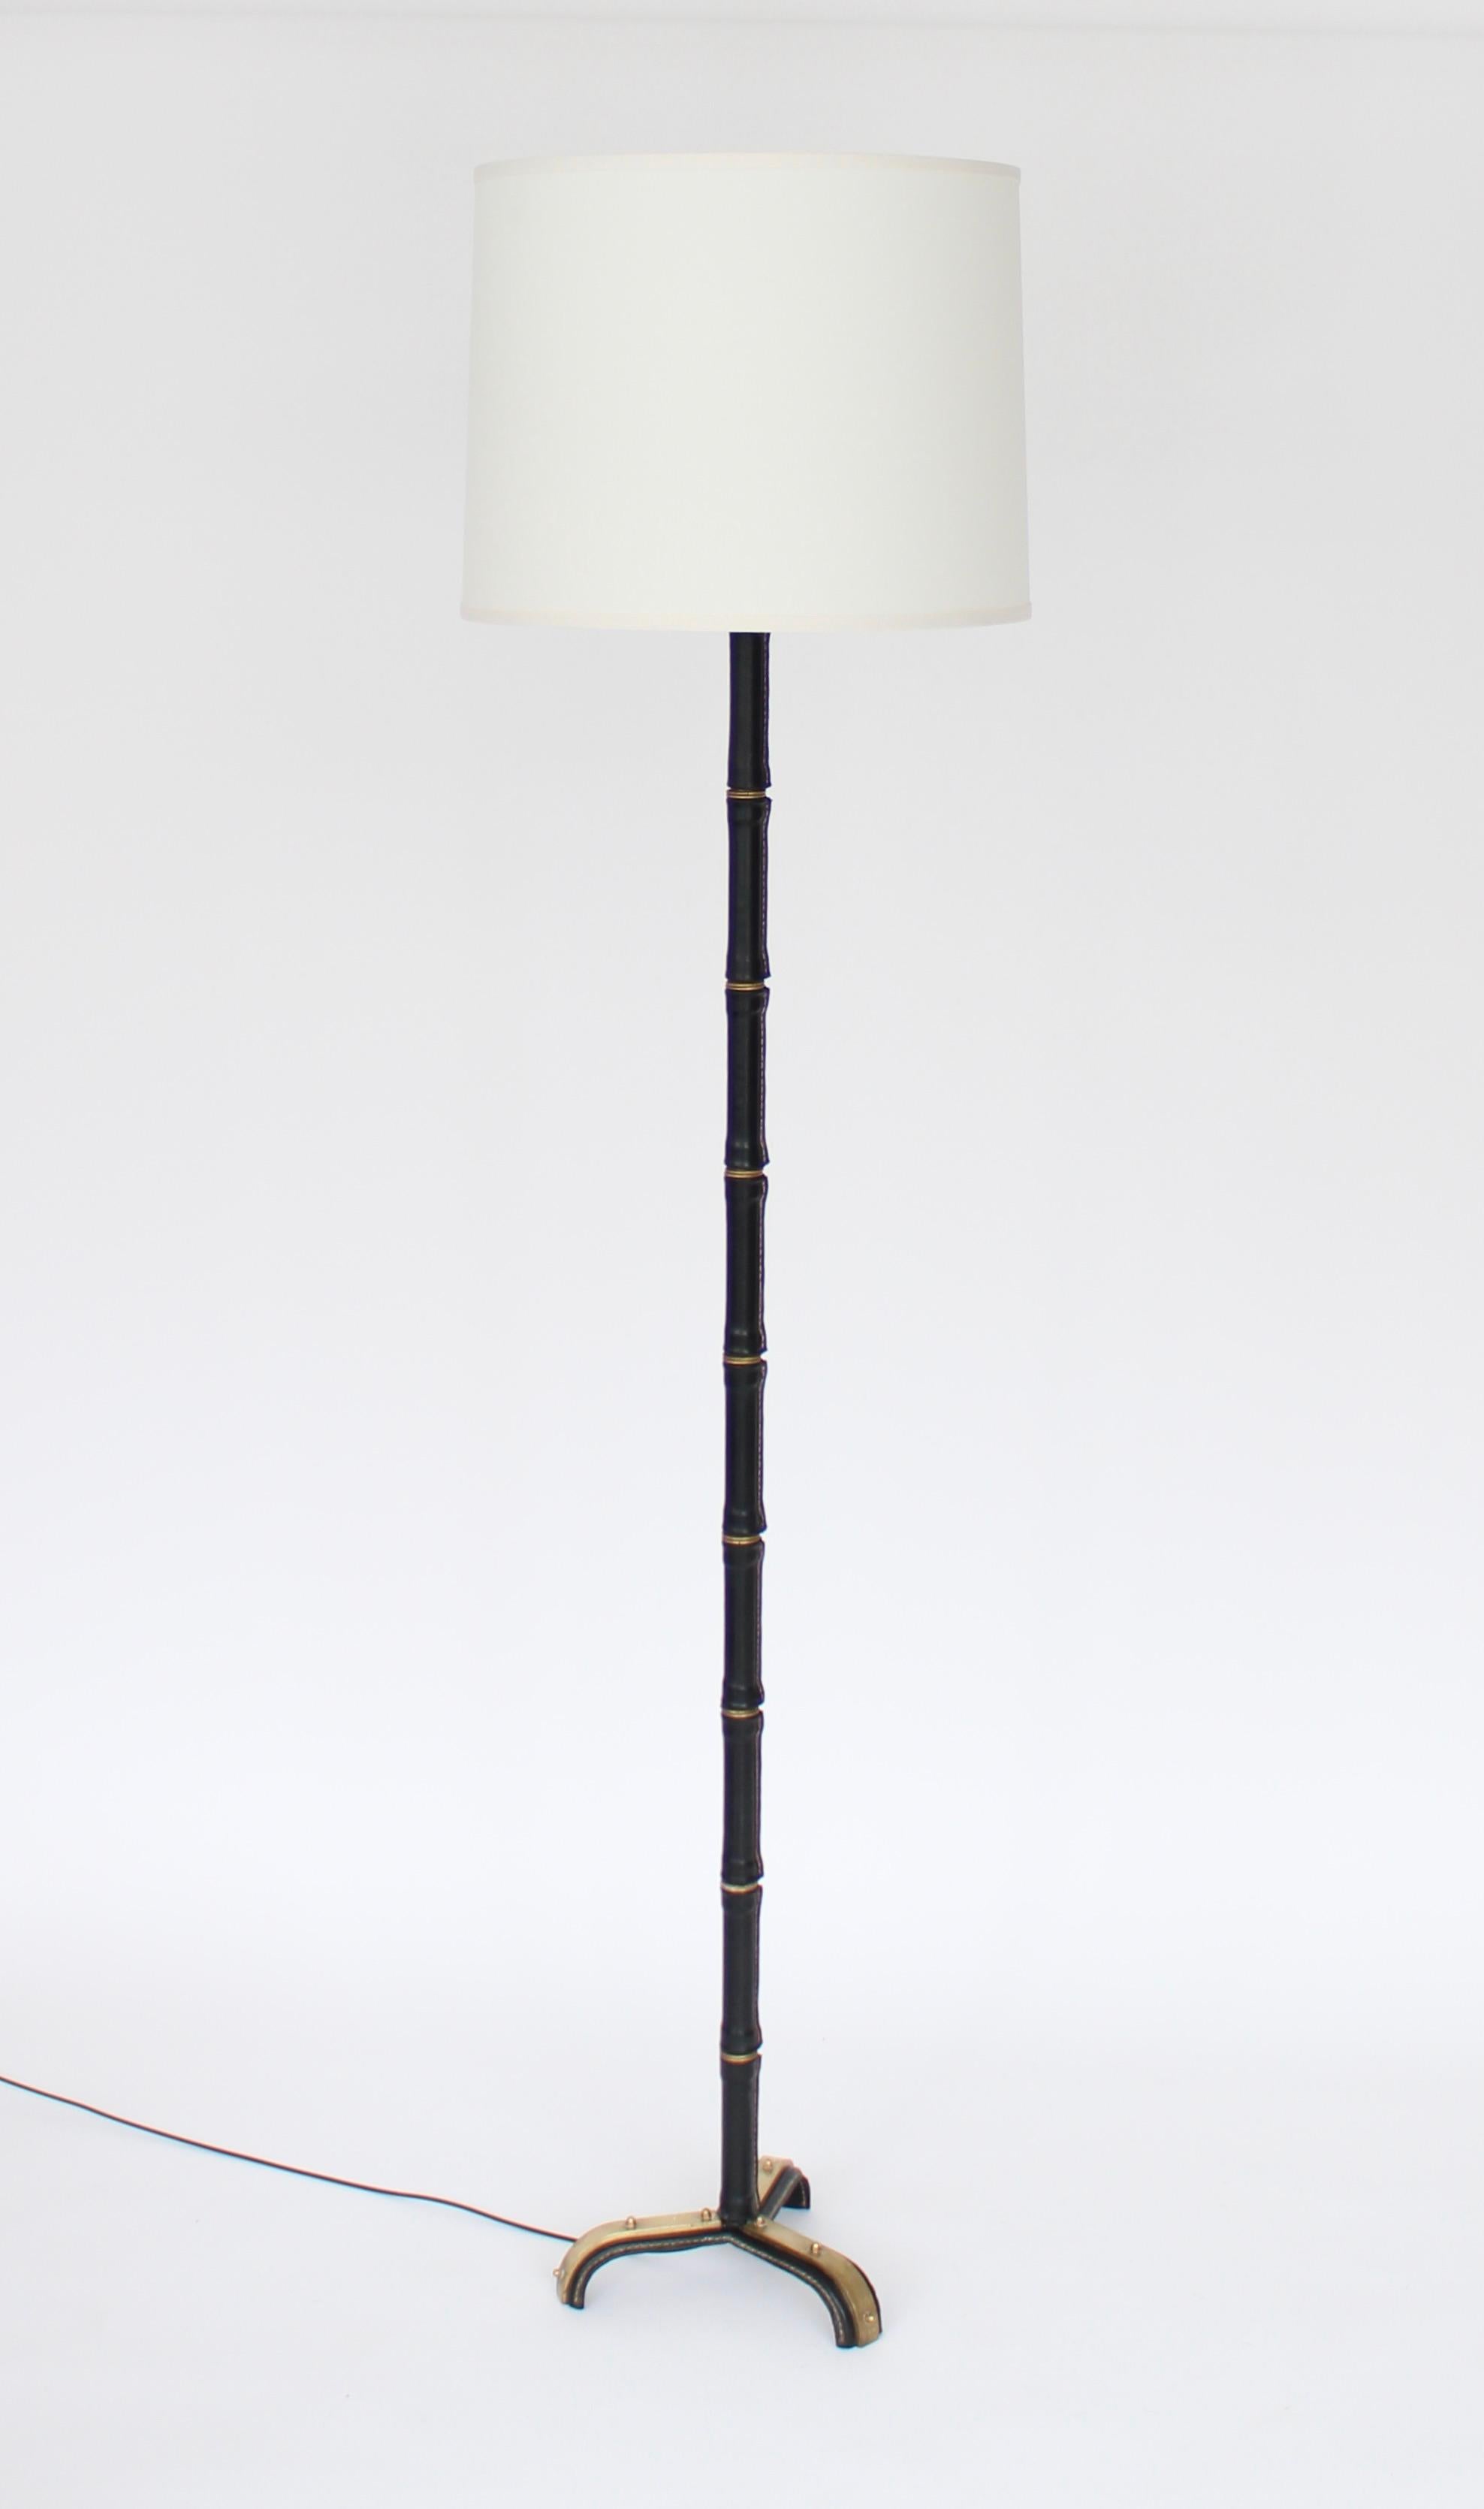 French designer Jacques Adnet leather wrapped floor lamp with signature bamboo leather and brass stem and contrast stitching. Leather all the way down to the tripod base with nice brass details throughout and on the base. 
Newly rewired with new